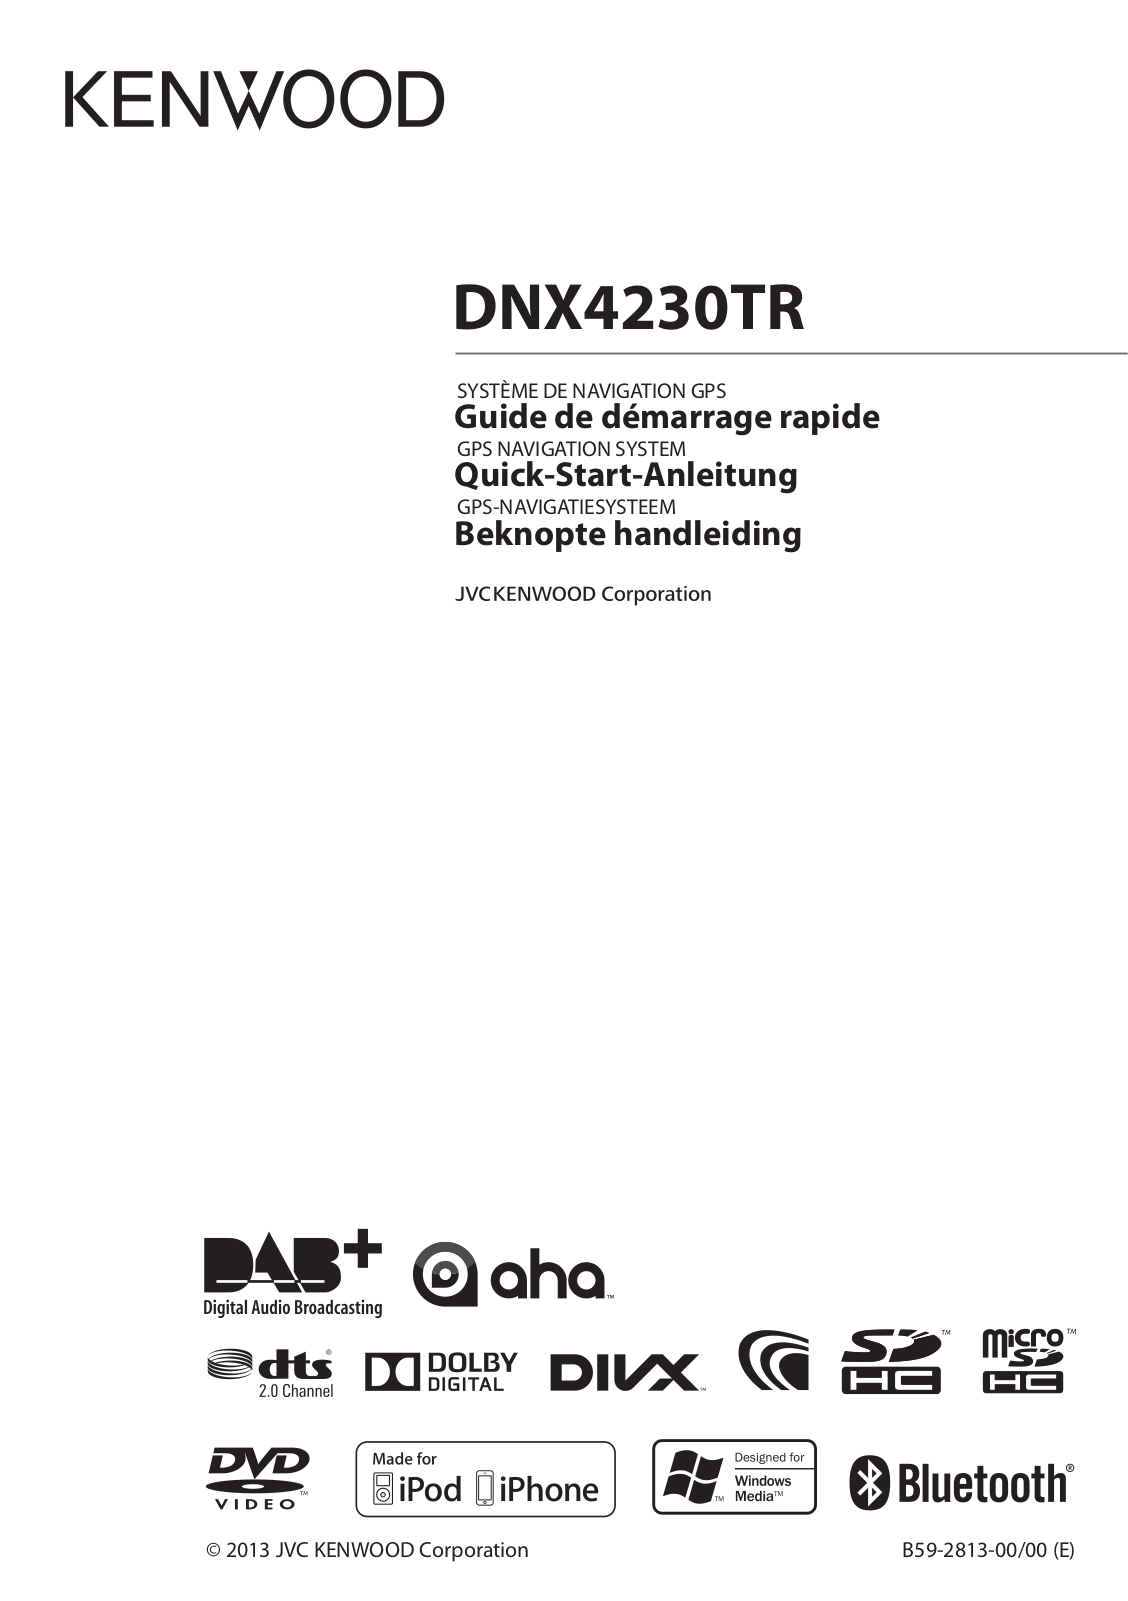 KENWOOD DNX 4230 TR Guide rapide